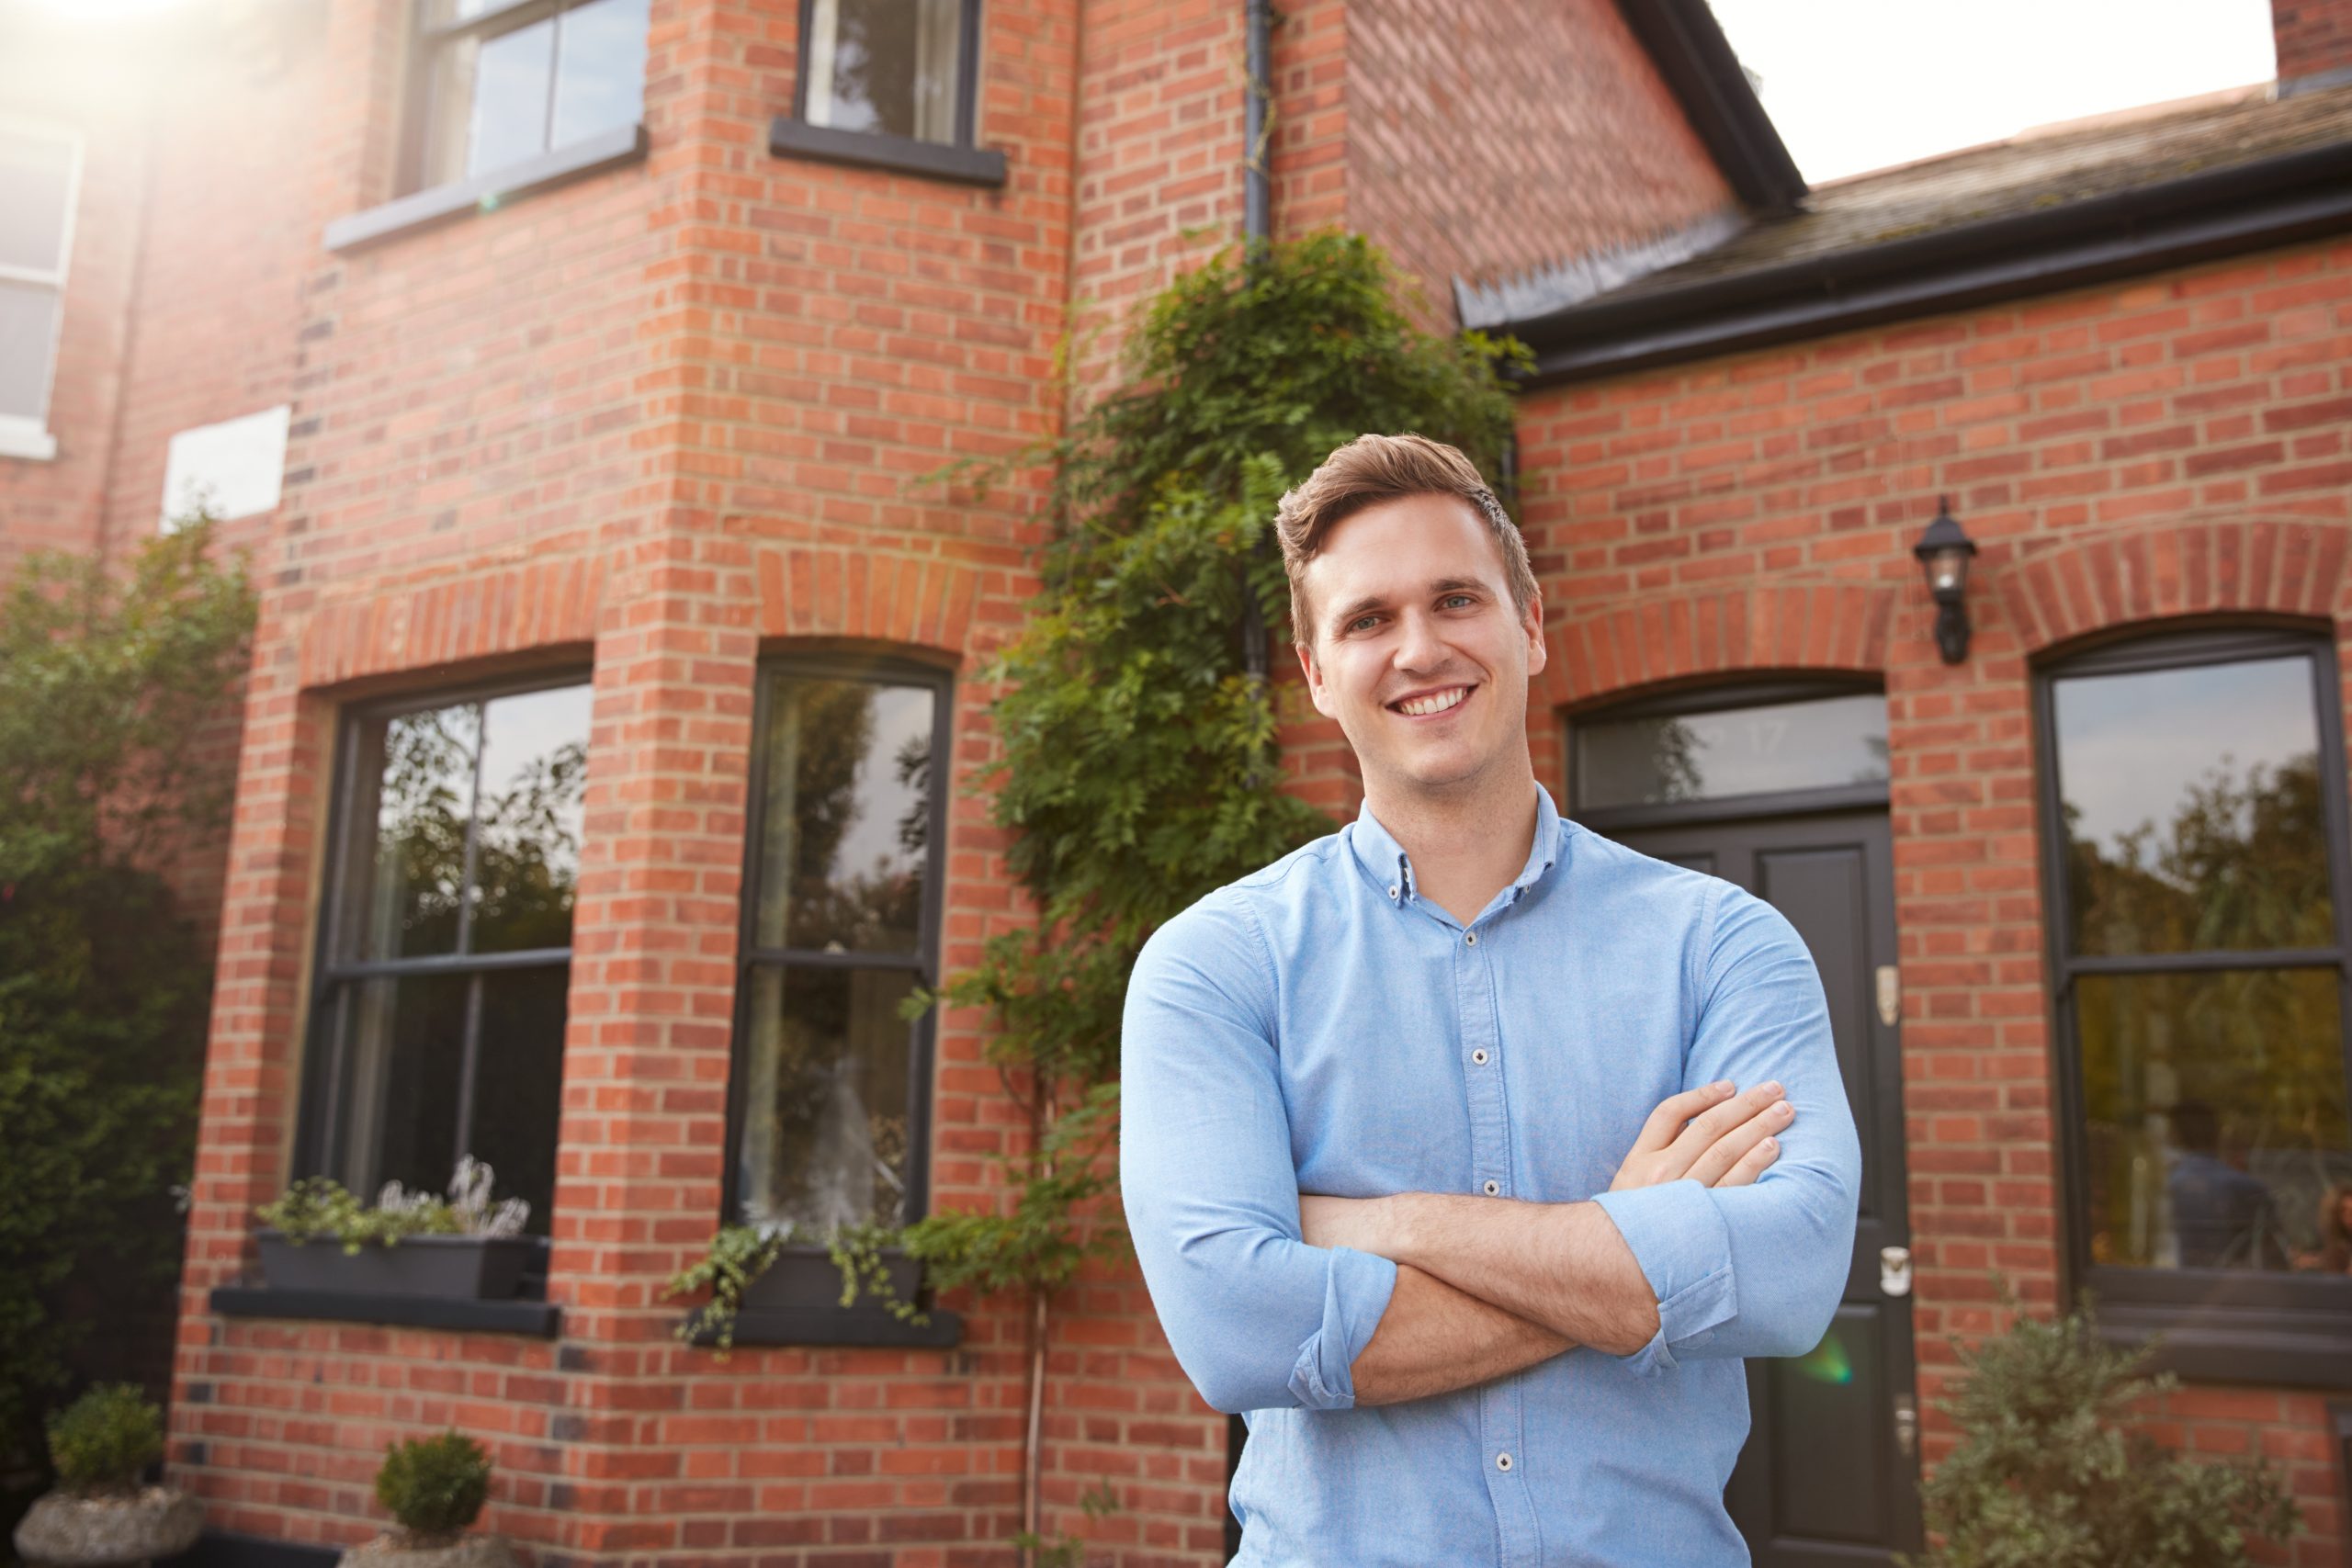 derby mortgage broker helped him getting his dream home